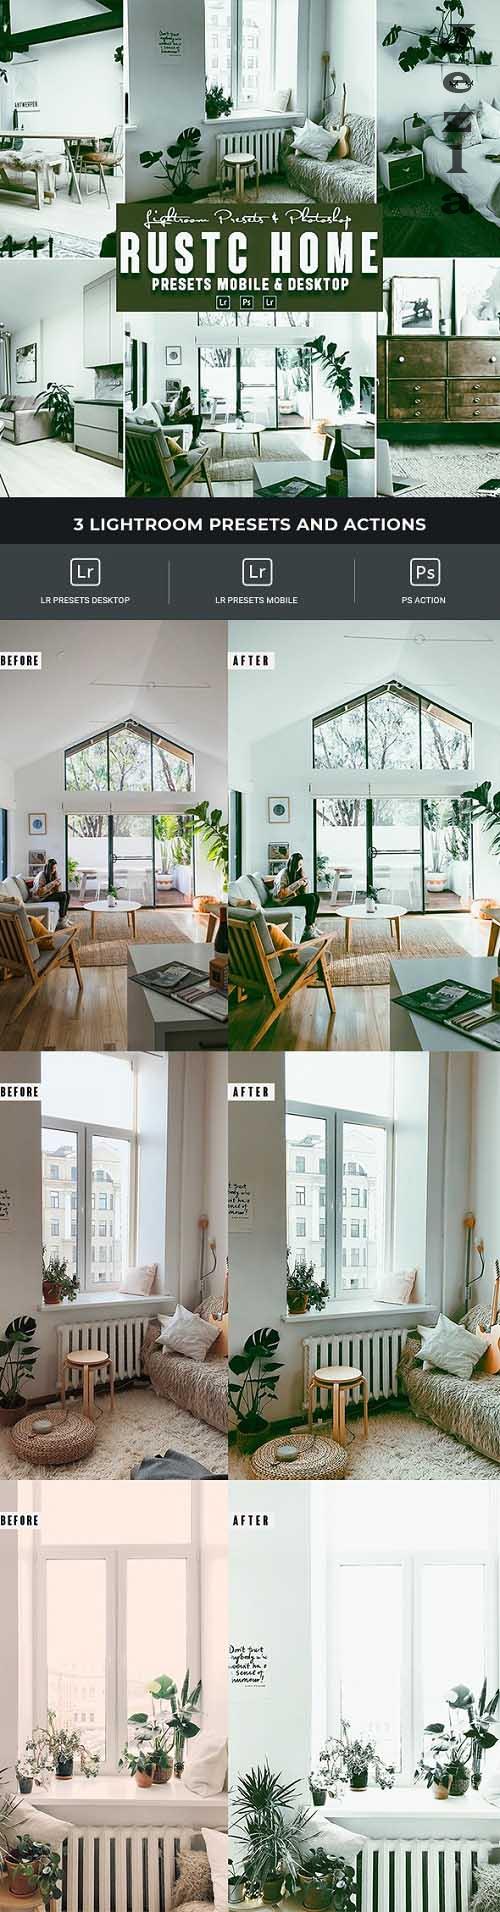 Rustic Home Photoshop Action & Lightrom Presets - 34545633